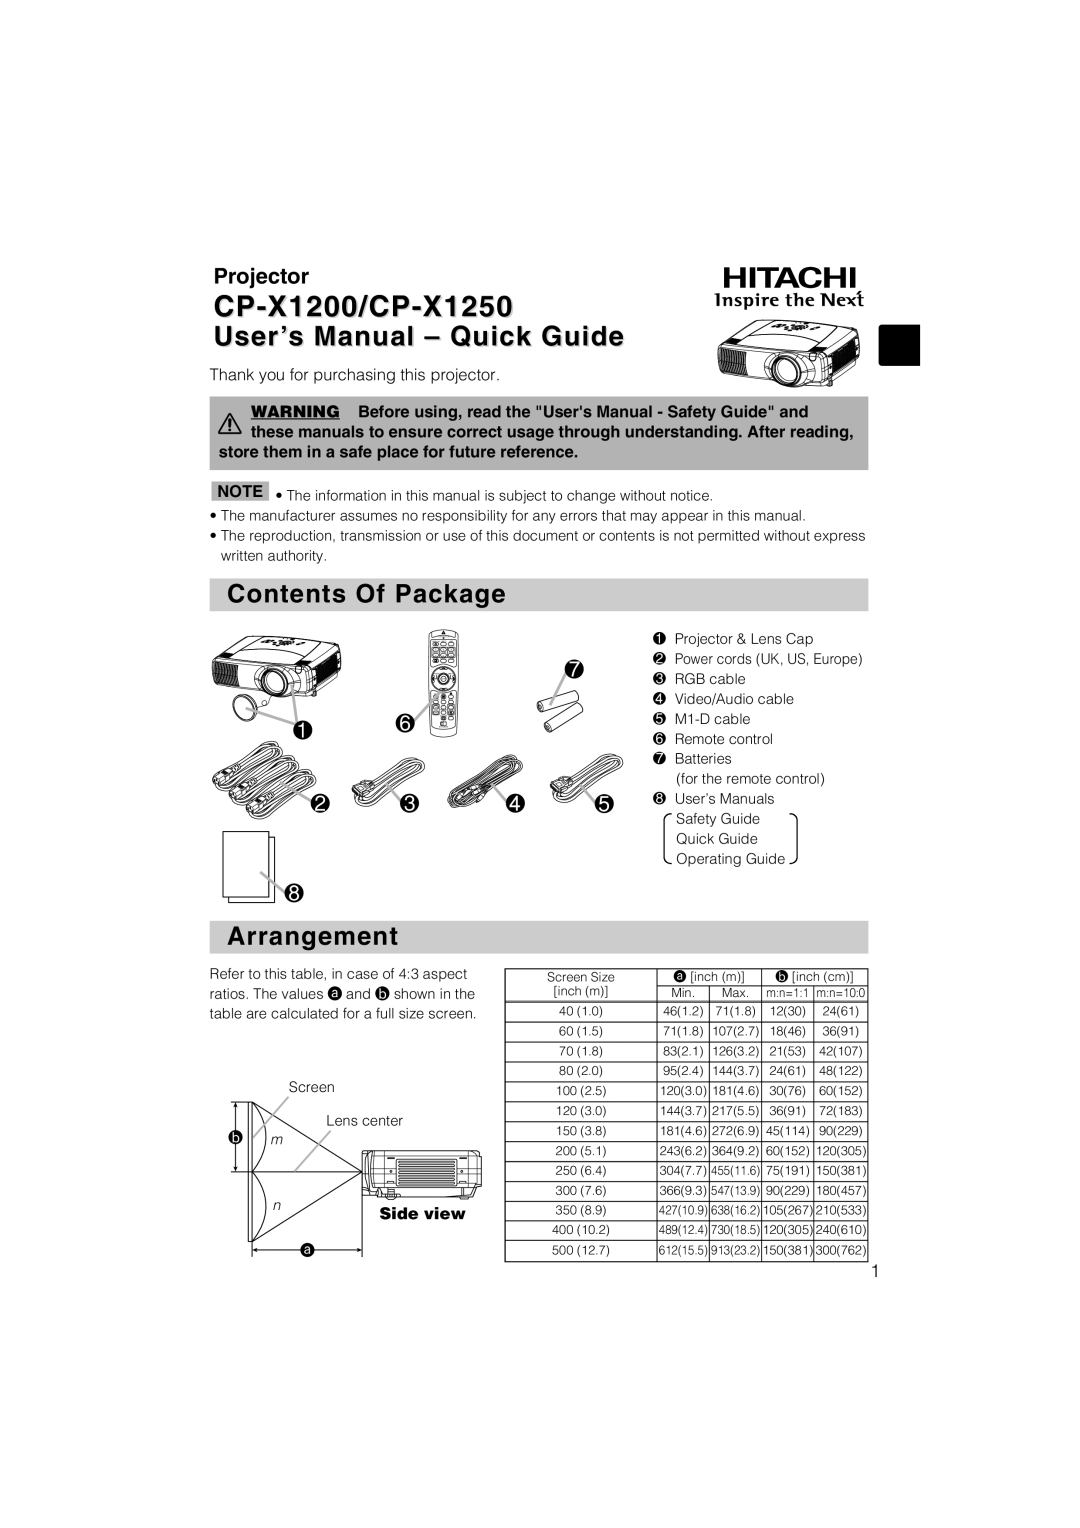 Hitachi CP-X1250 user manual Contents Of Package, Arrangement, store them in a safe place for future reference, Side view 